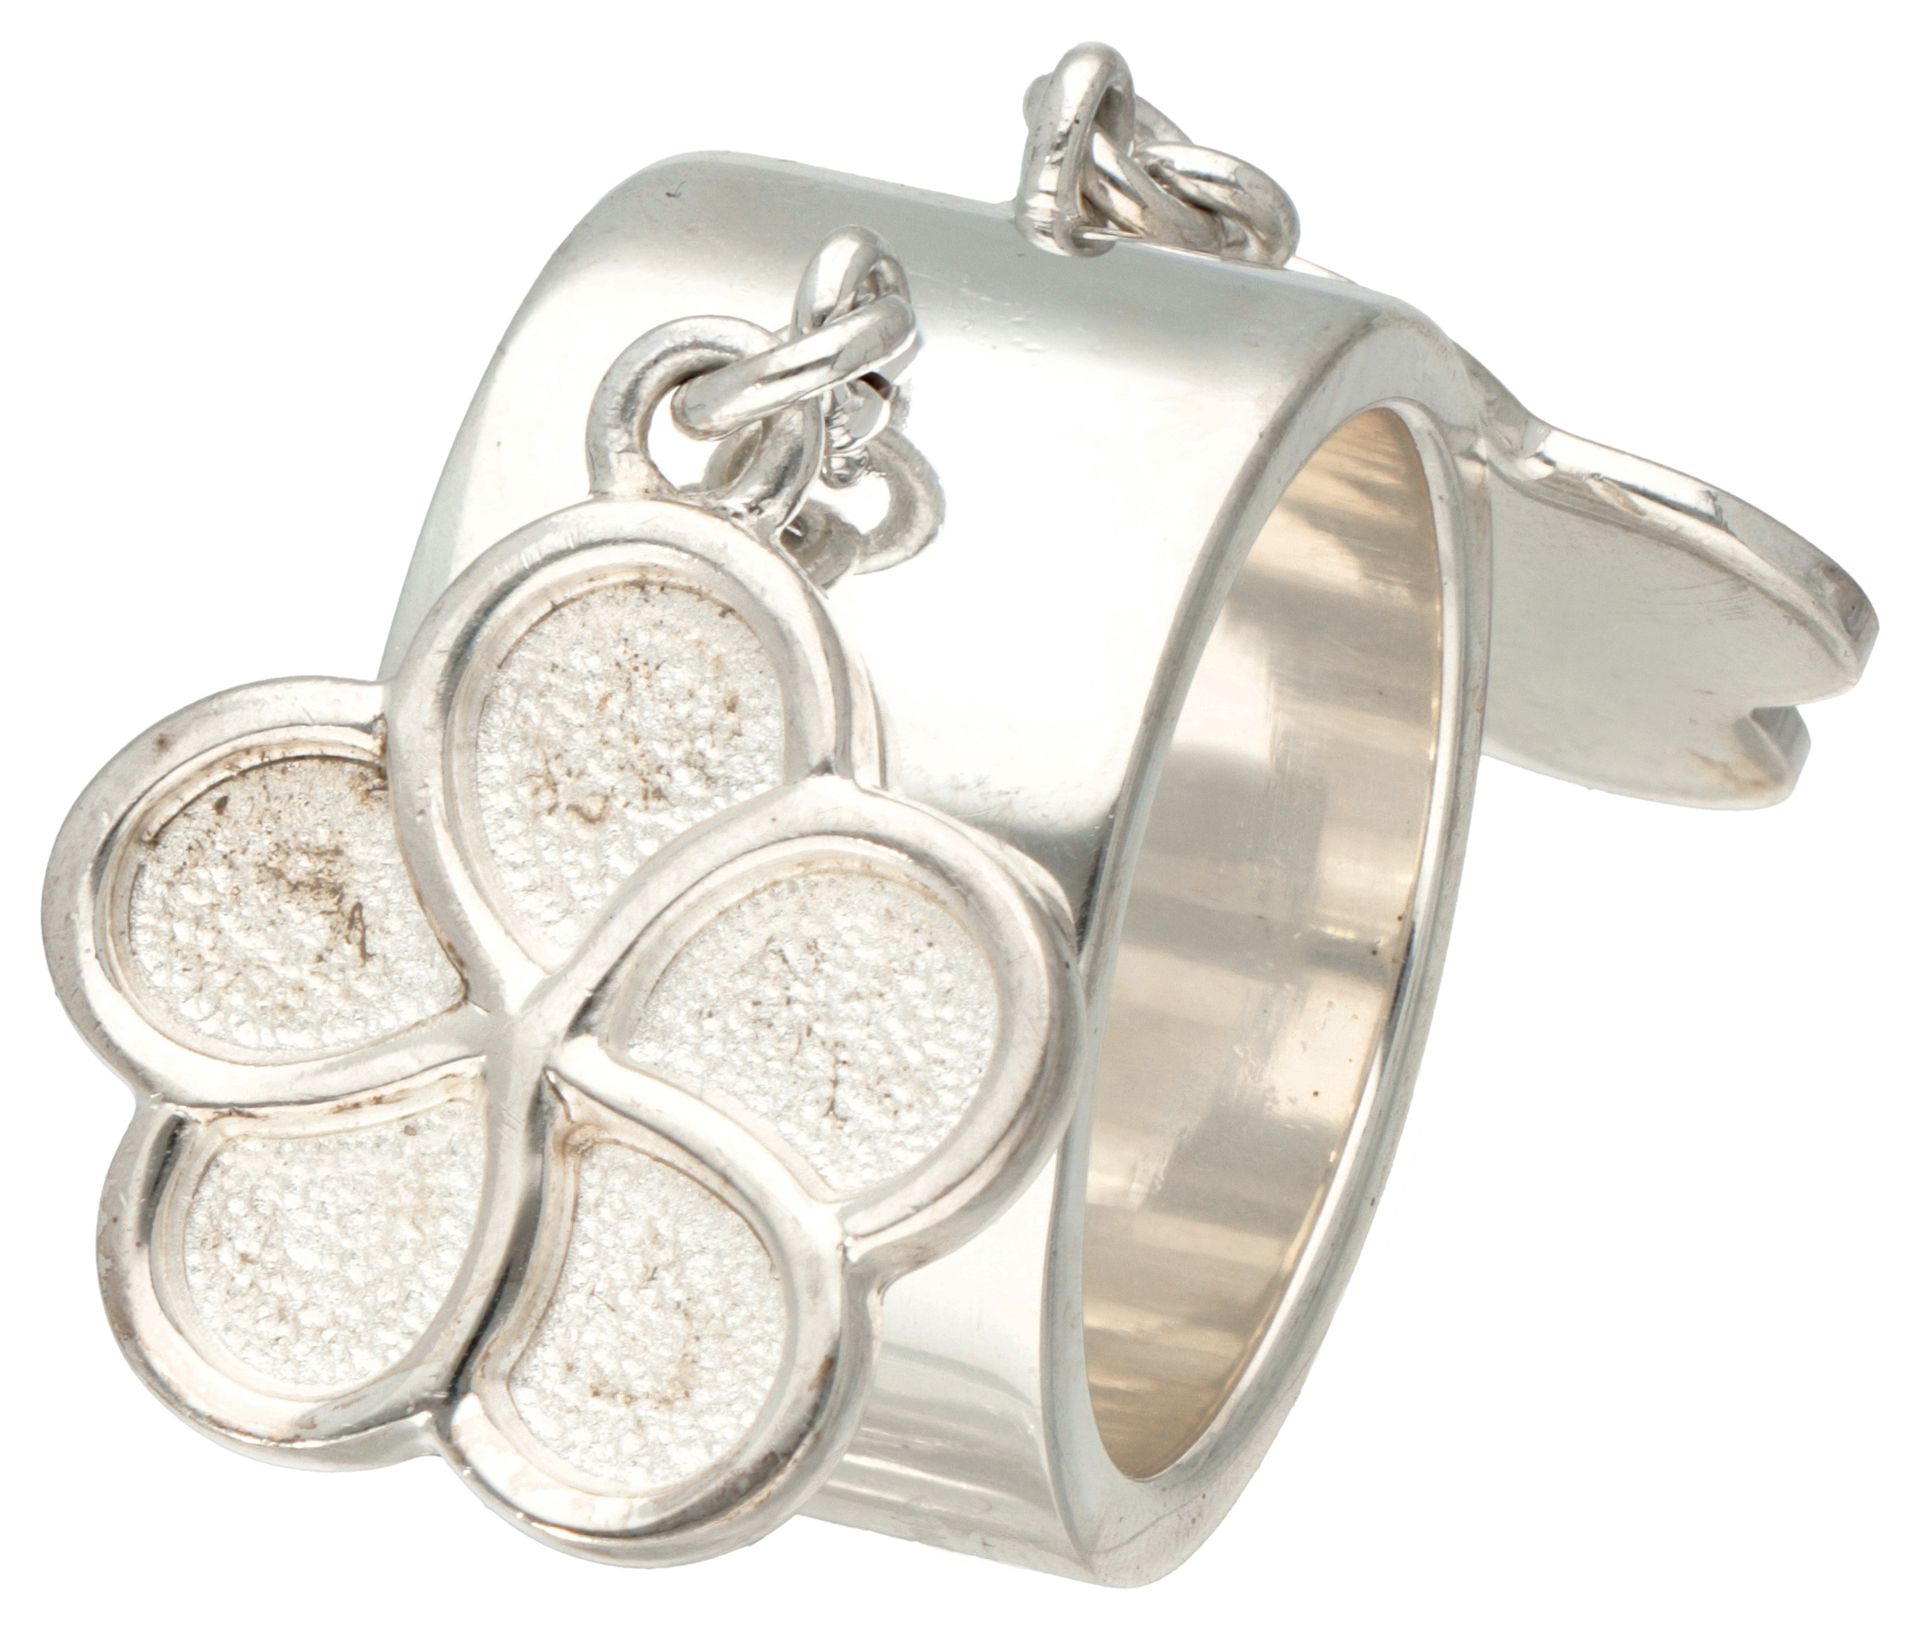 Sterling silver Christofle band ring with two flower-shaped charms. Sellos: Chri&hellip;